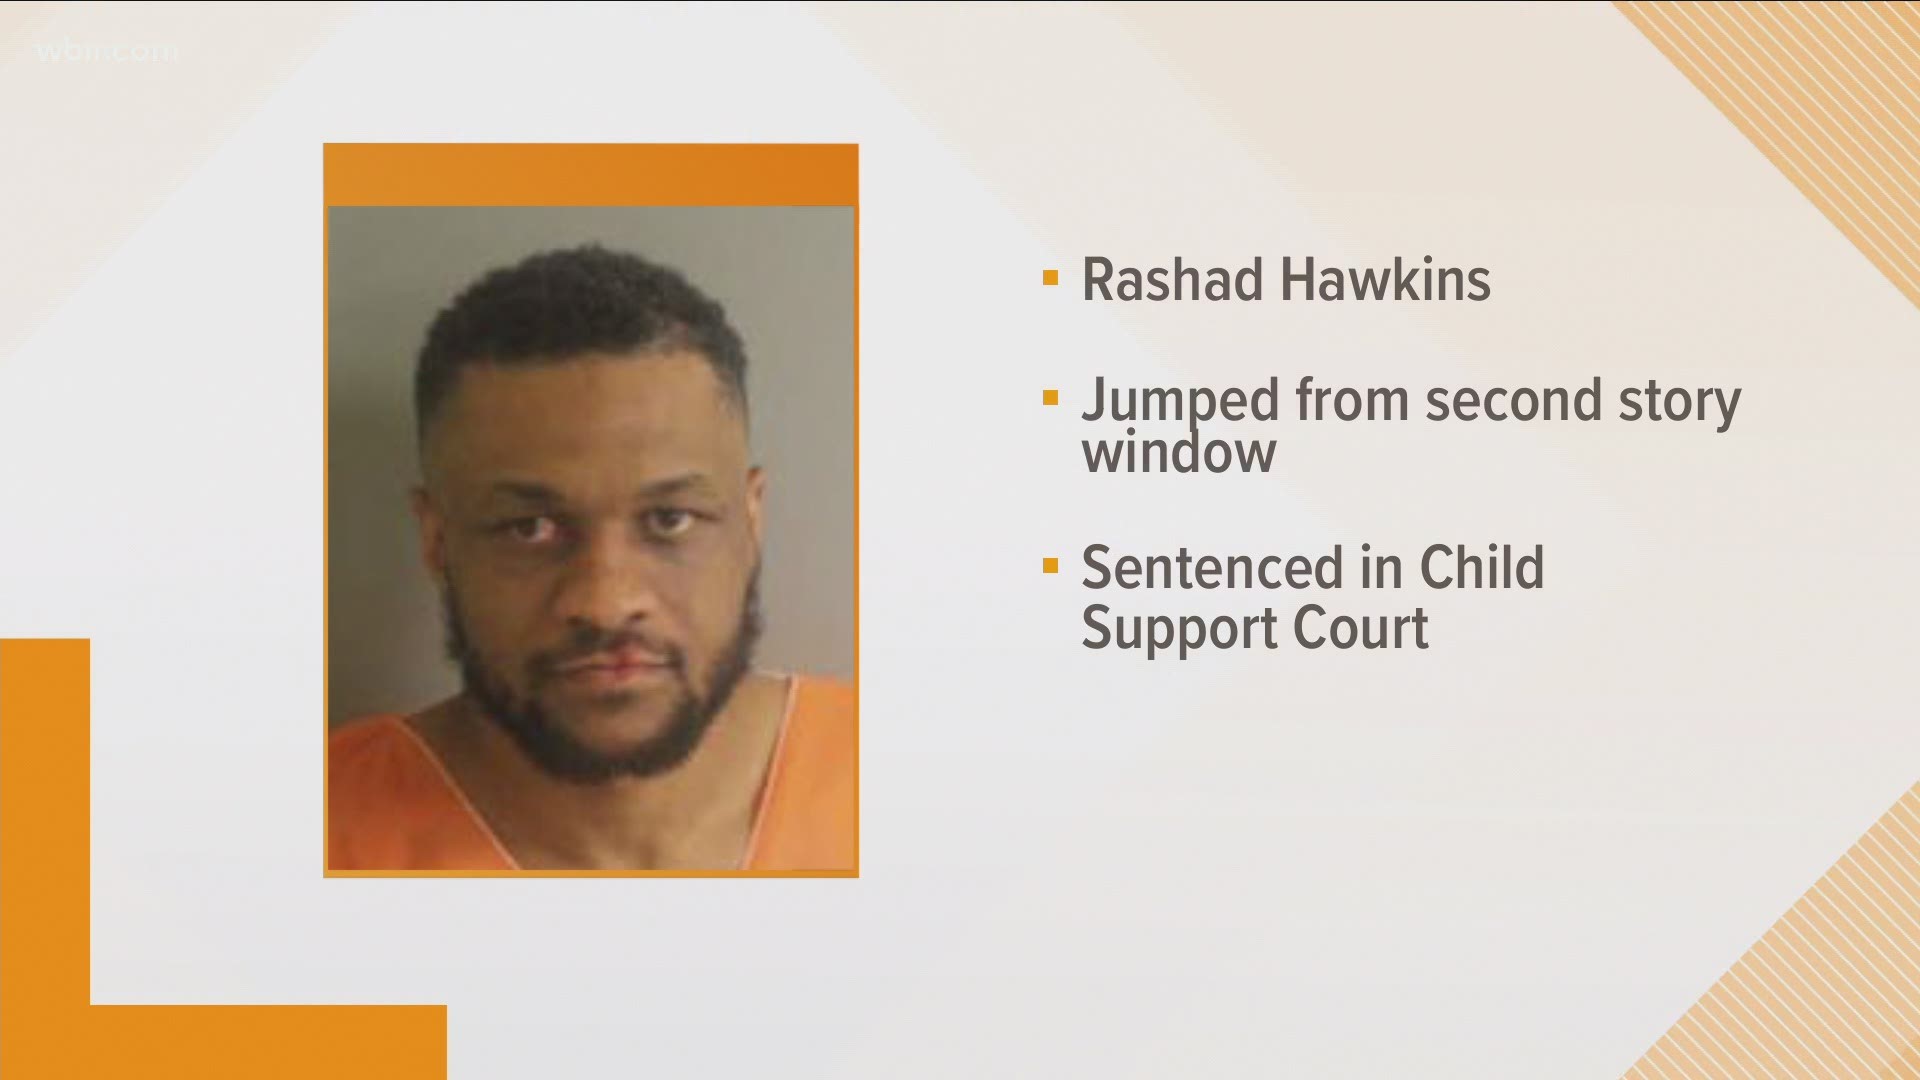 Deputies are searching for Rashad Hawkins after he escaped from court shortly after being sentenced to serve time for failing to pay child support.